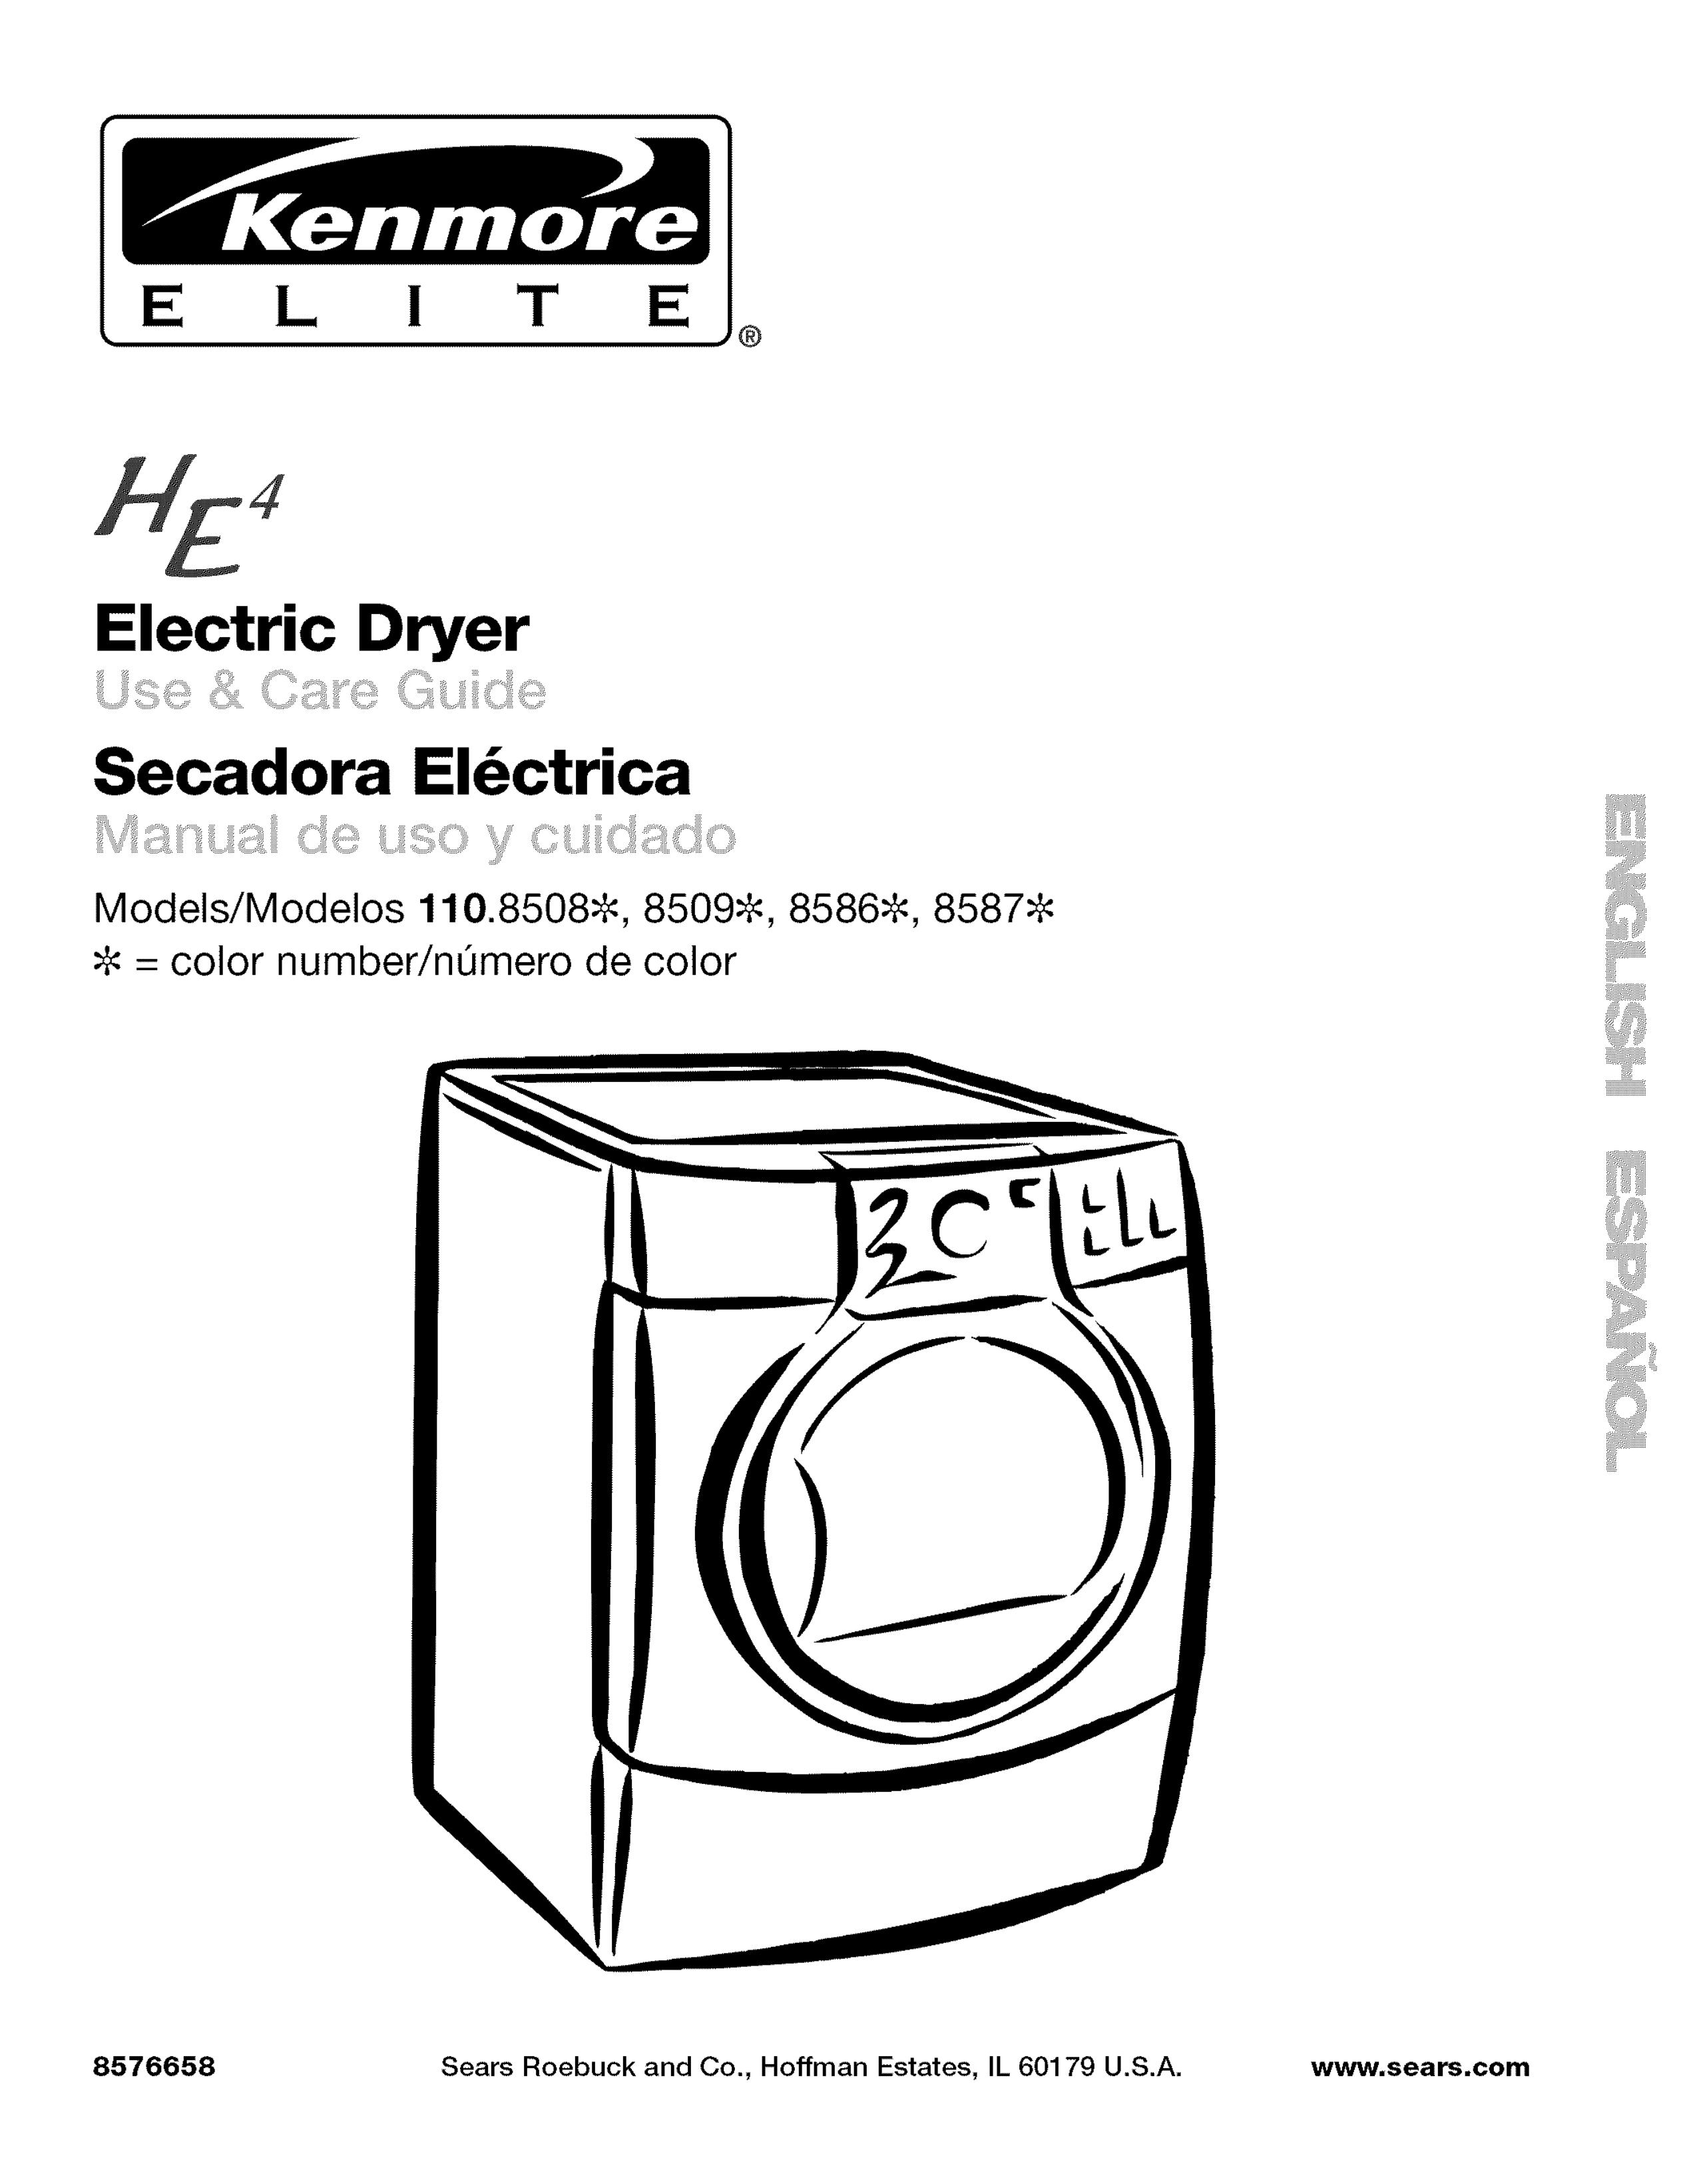 Kenmore 110.8509# Clothes Dryer User Manual